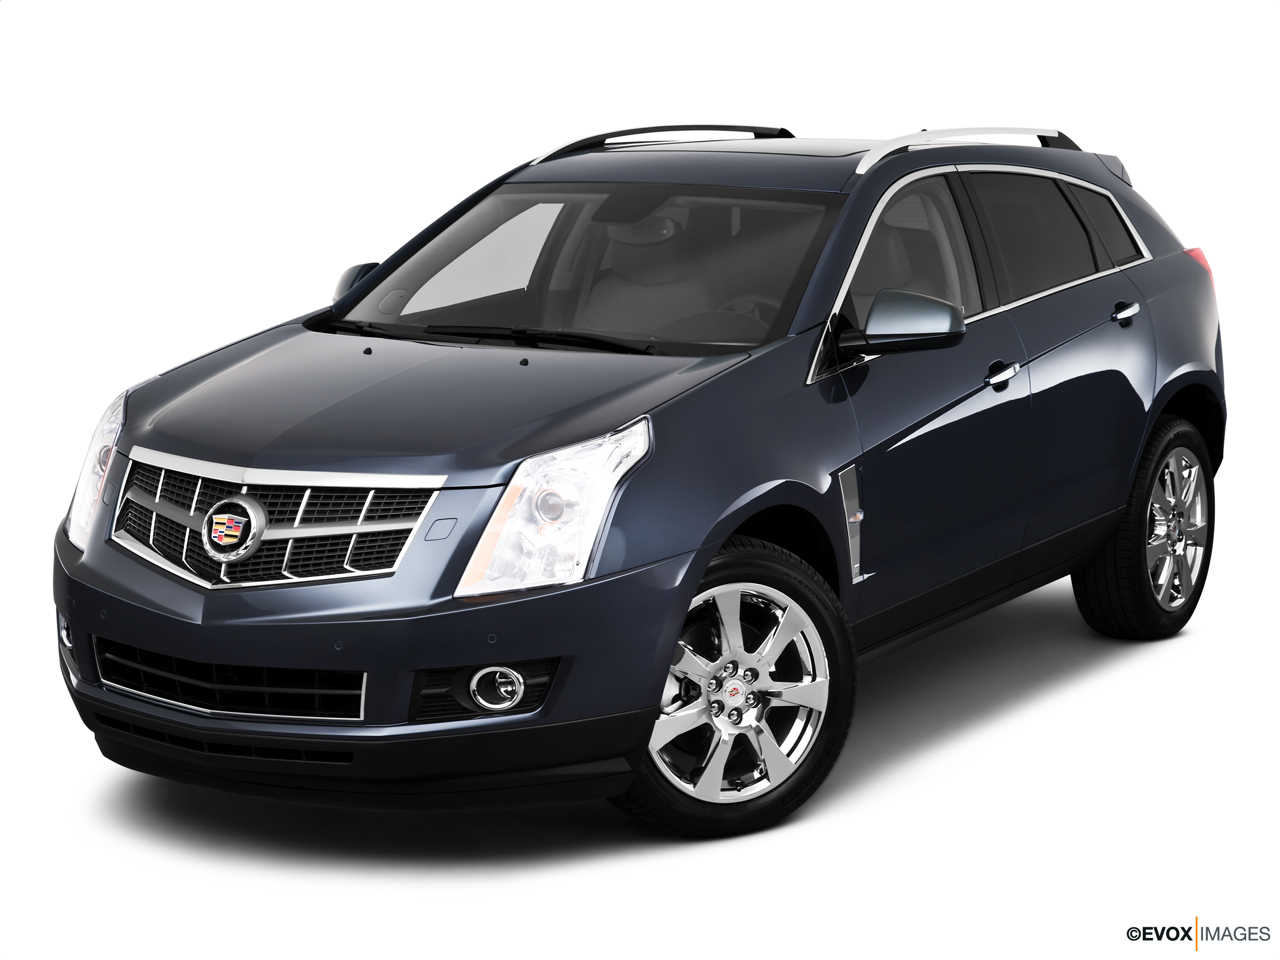 2010 Cadillac SRX Crossover Premium Collection Front angle view. 